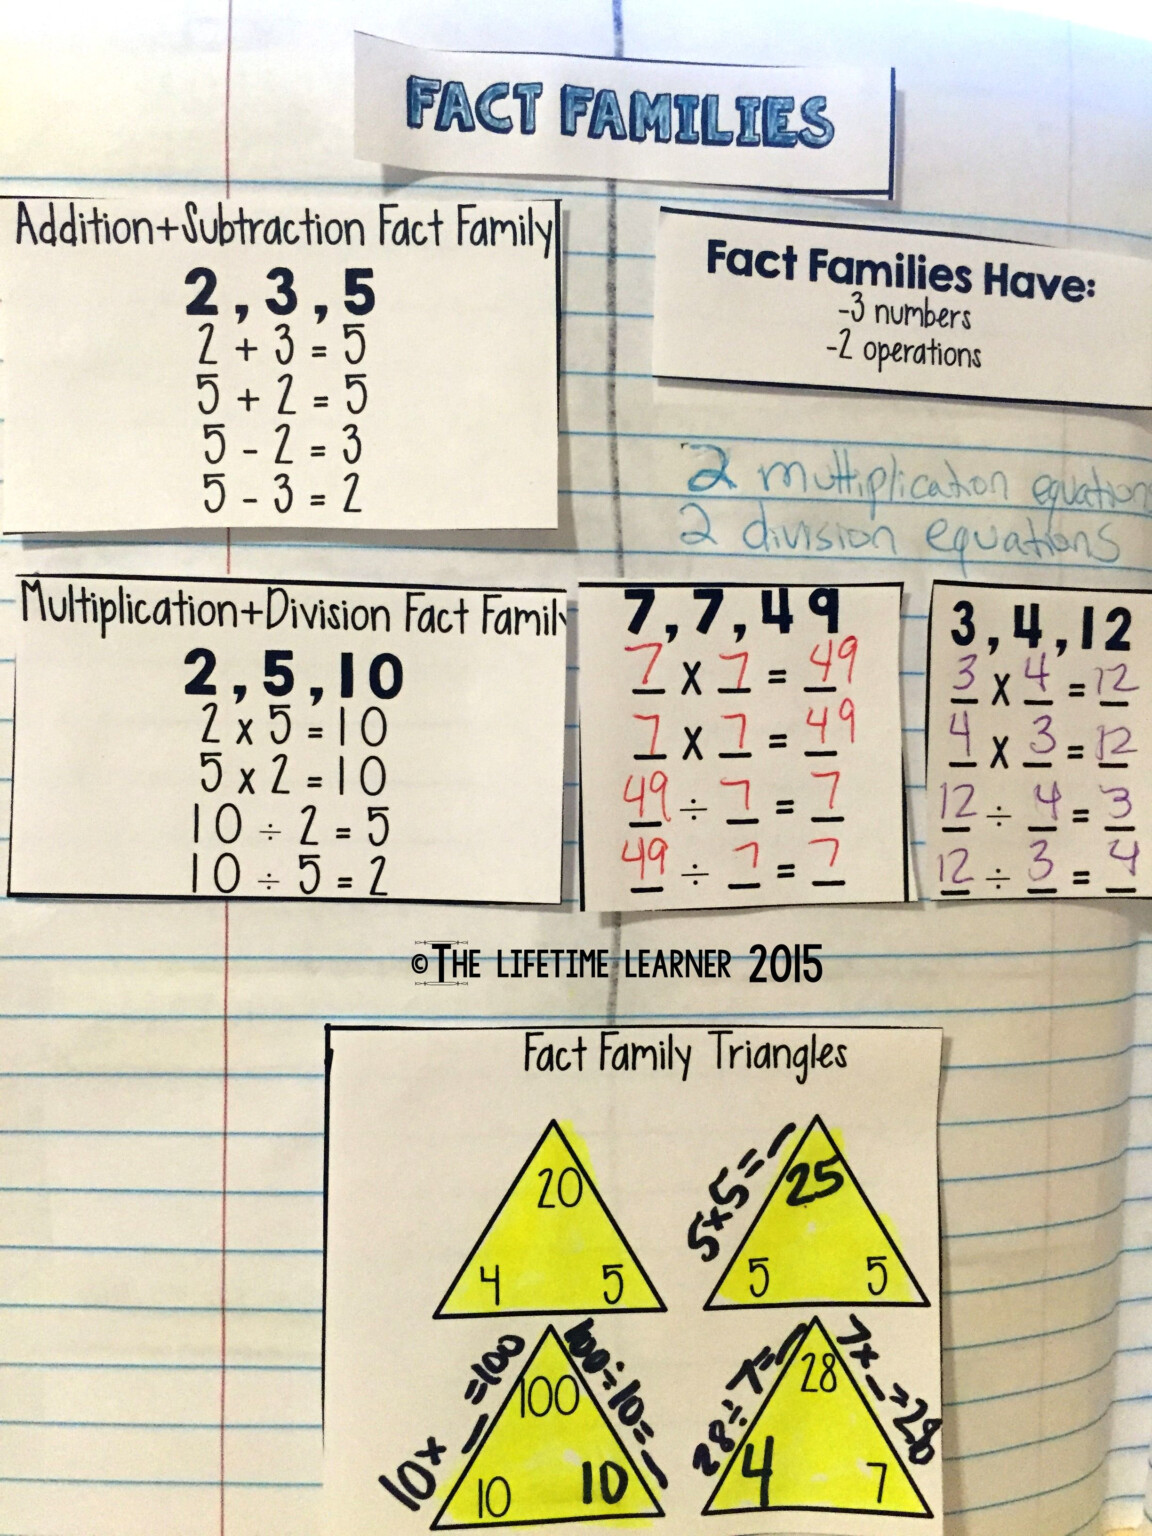 multiplication-and-division-fact-family-worksheets-fact-family